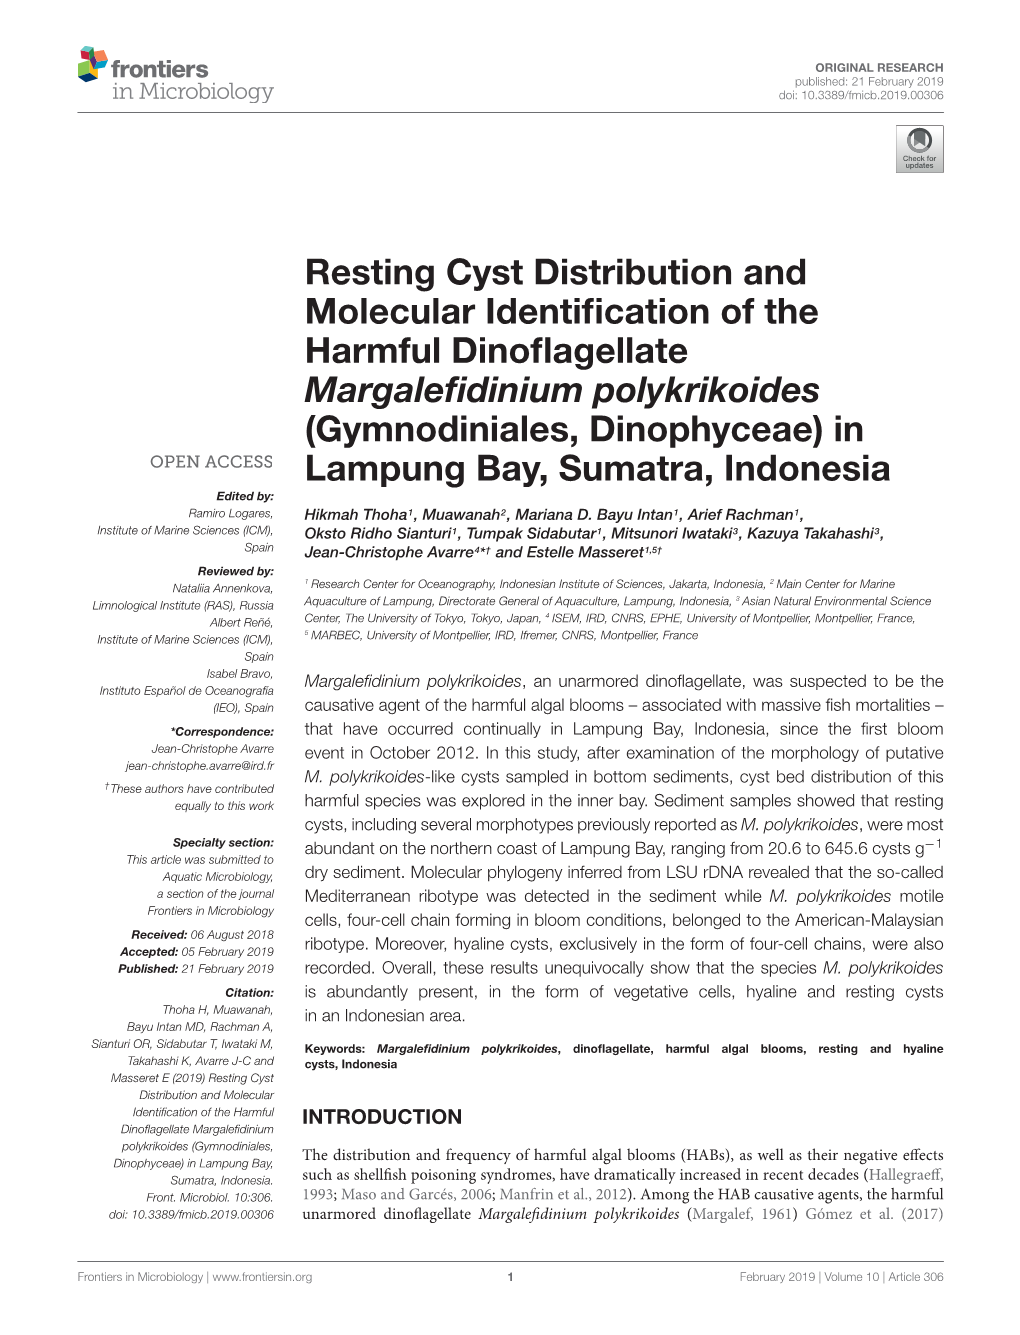 Resting Cyst Distribution and Molecular